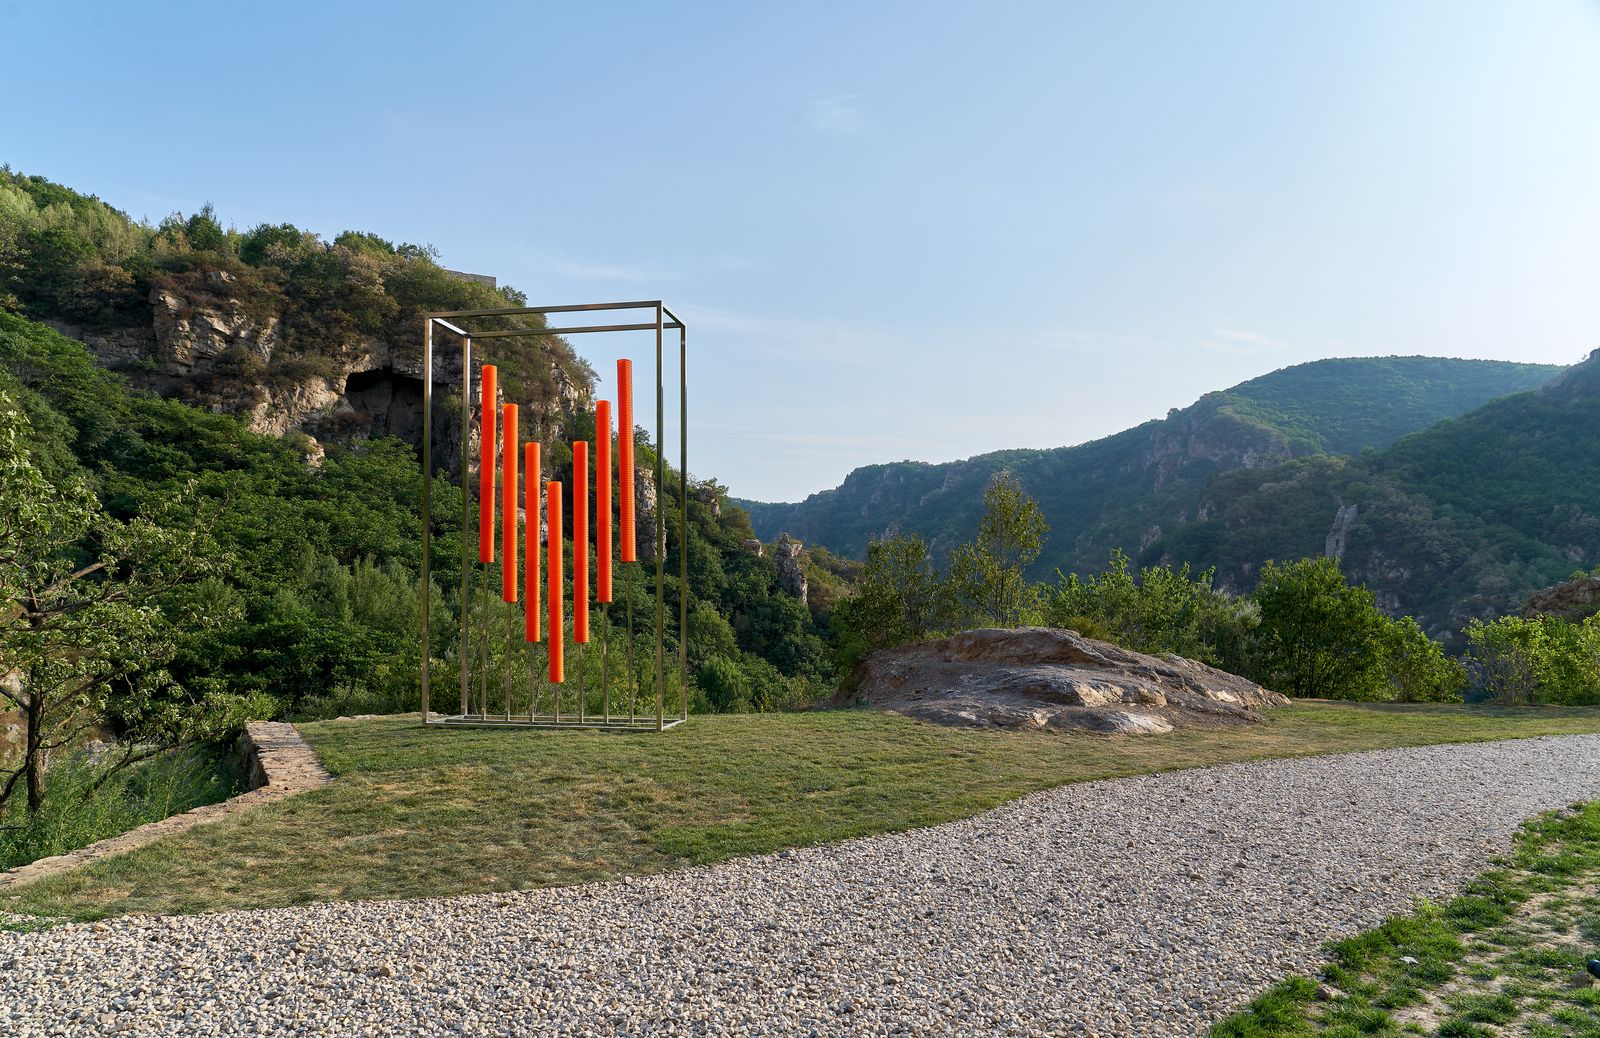 Alina Chaiderov, Phoenix (2023). Stainless steel, cable protection tube. 512 x 300 x 100 cm. Produced by Aranya Plein Air Art Project 2023. Exhibition view of Aranya Plein Air Art Project